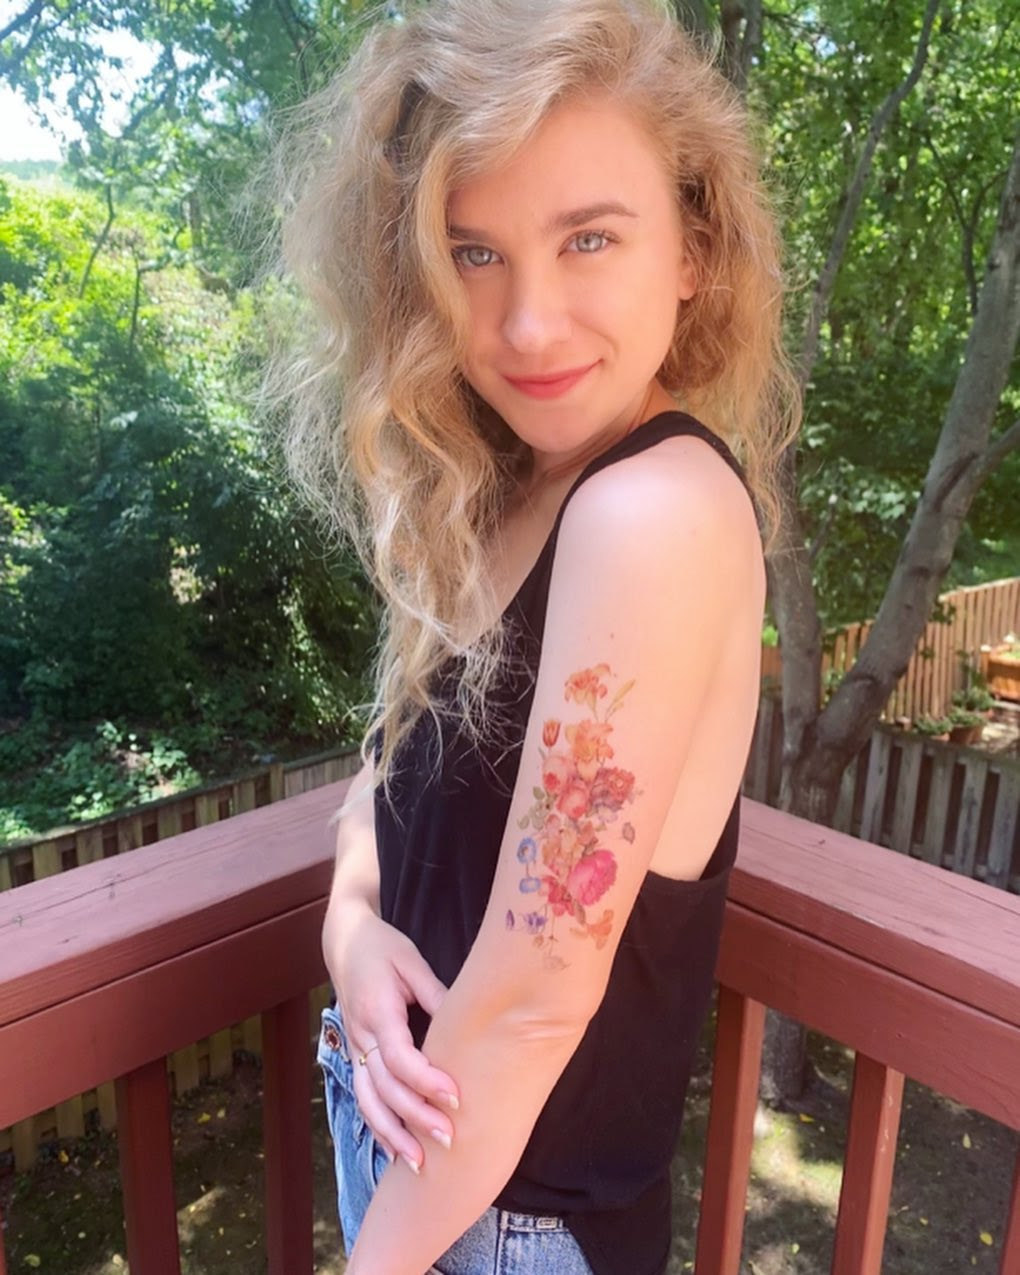 emma with a large, colorful illustrated floral temporary tattoo on her upper arm